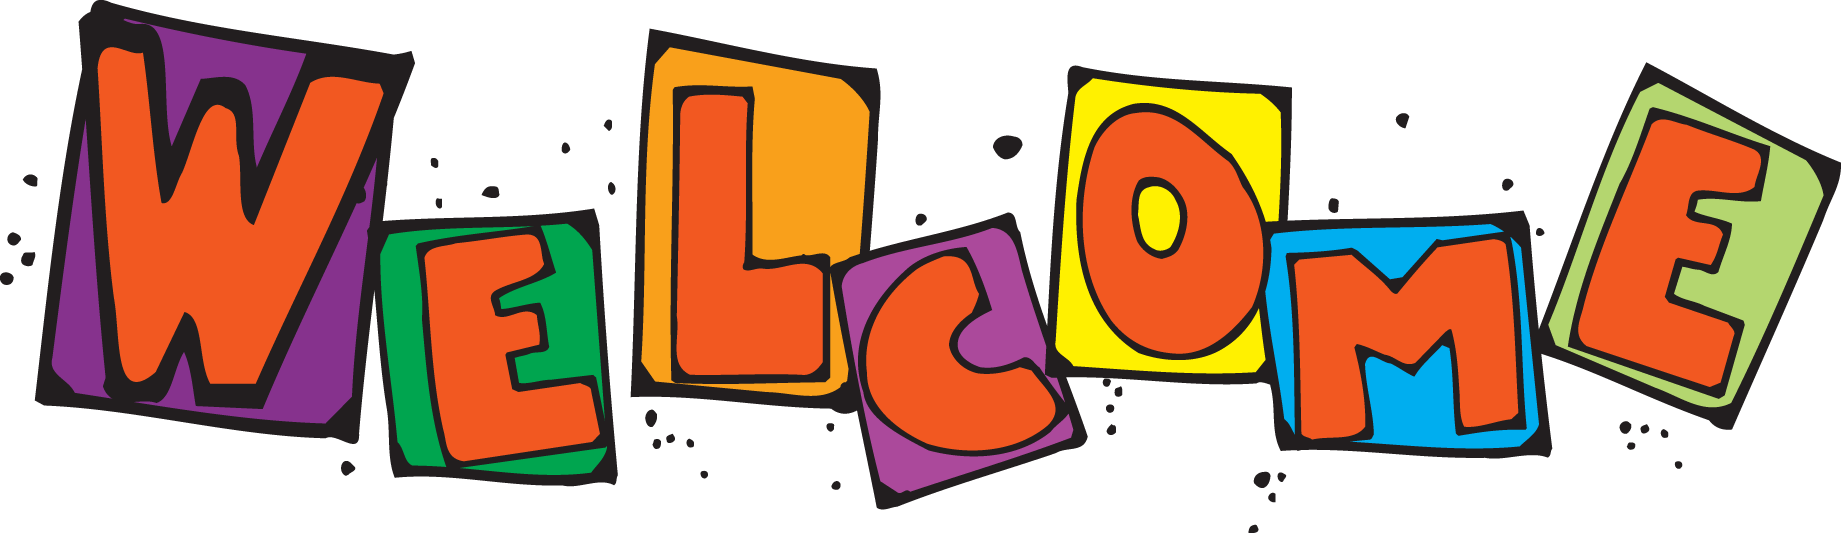 Welcome Animated Clip Art - ClipArt Best